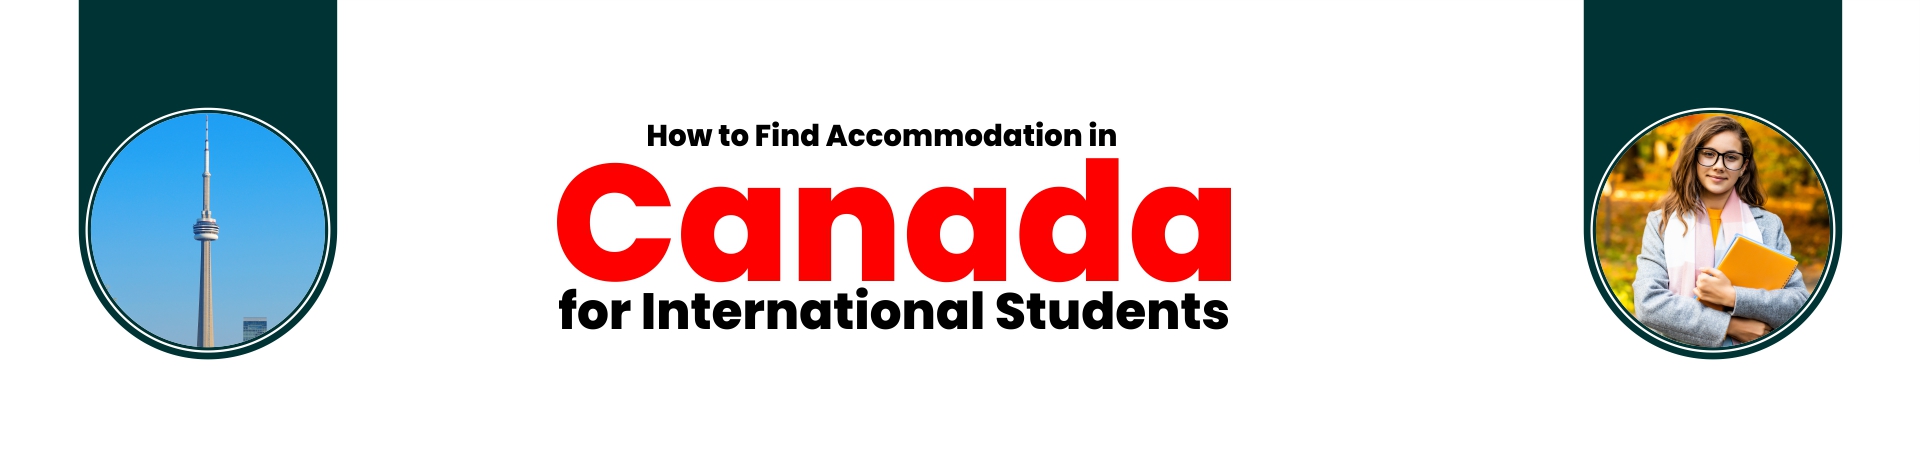 How to Find Accommodation in Canada for International Students